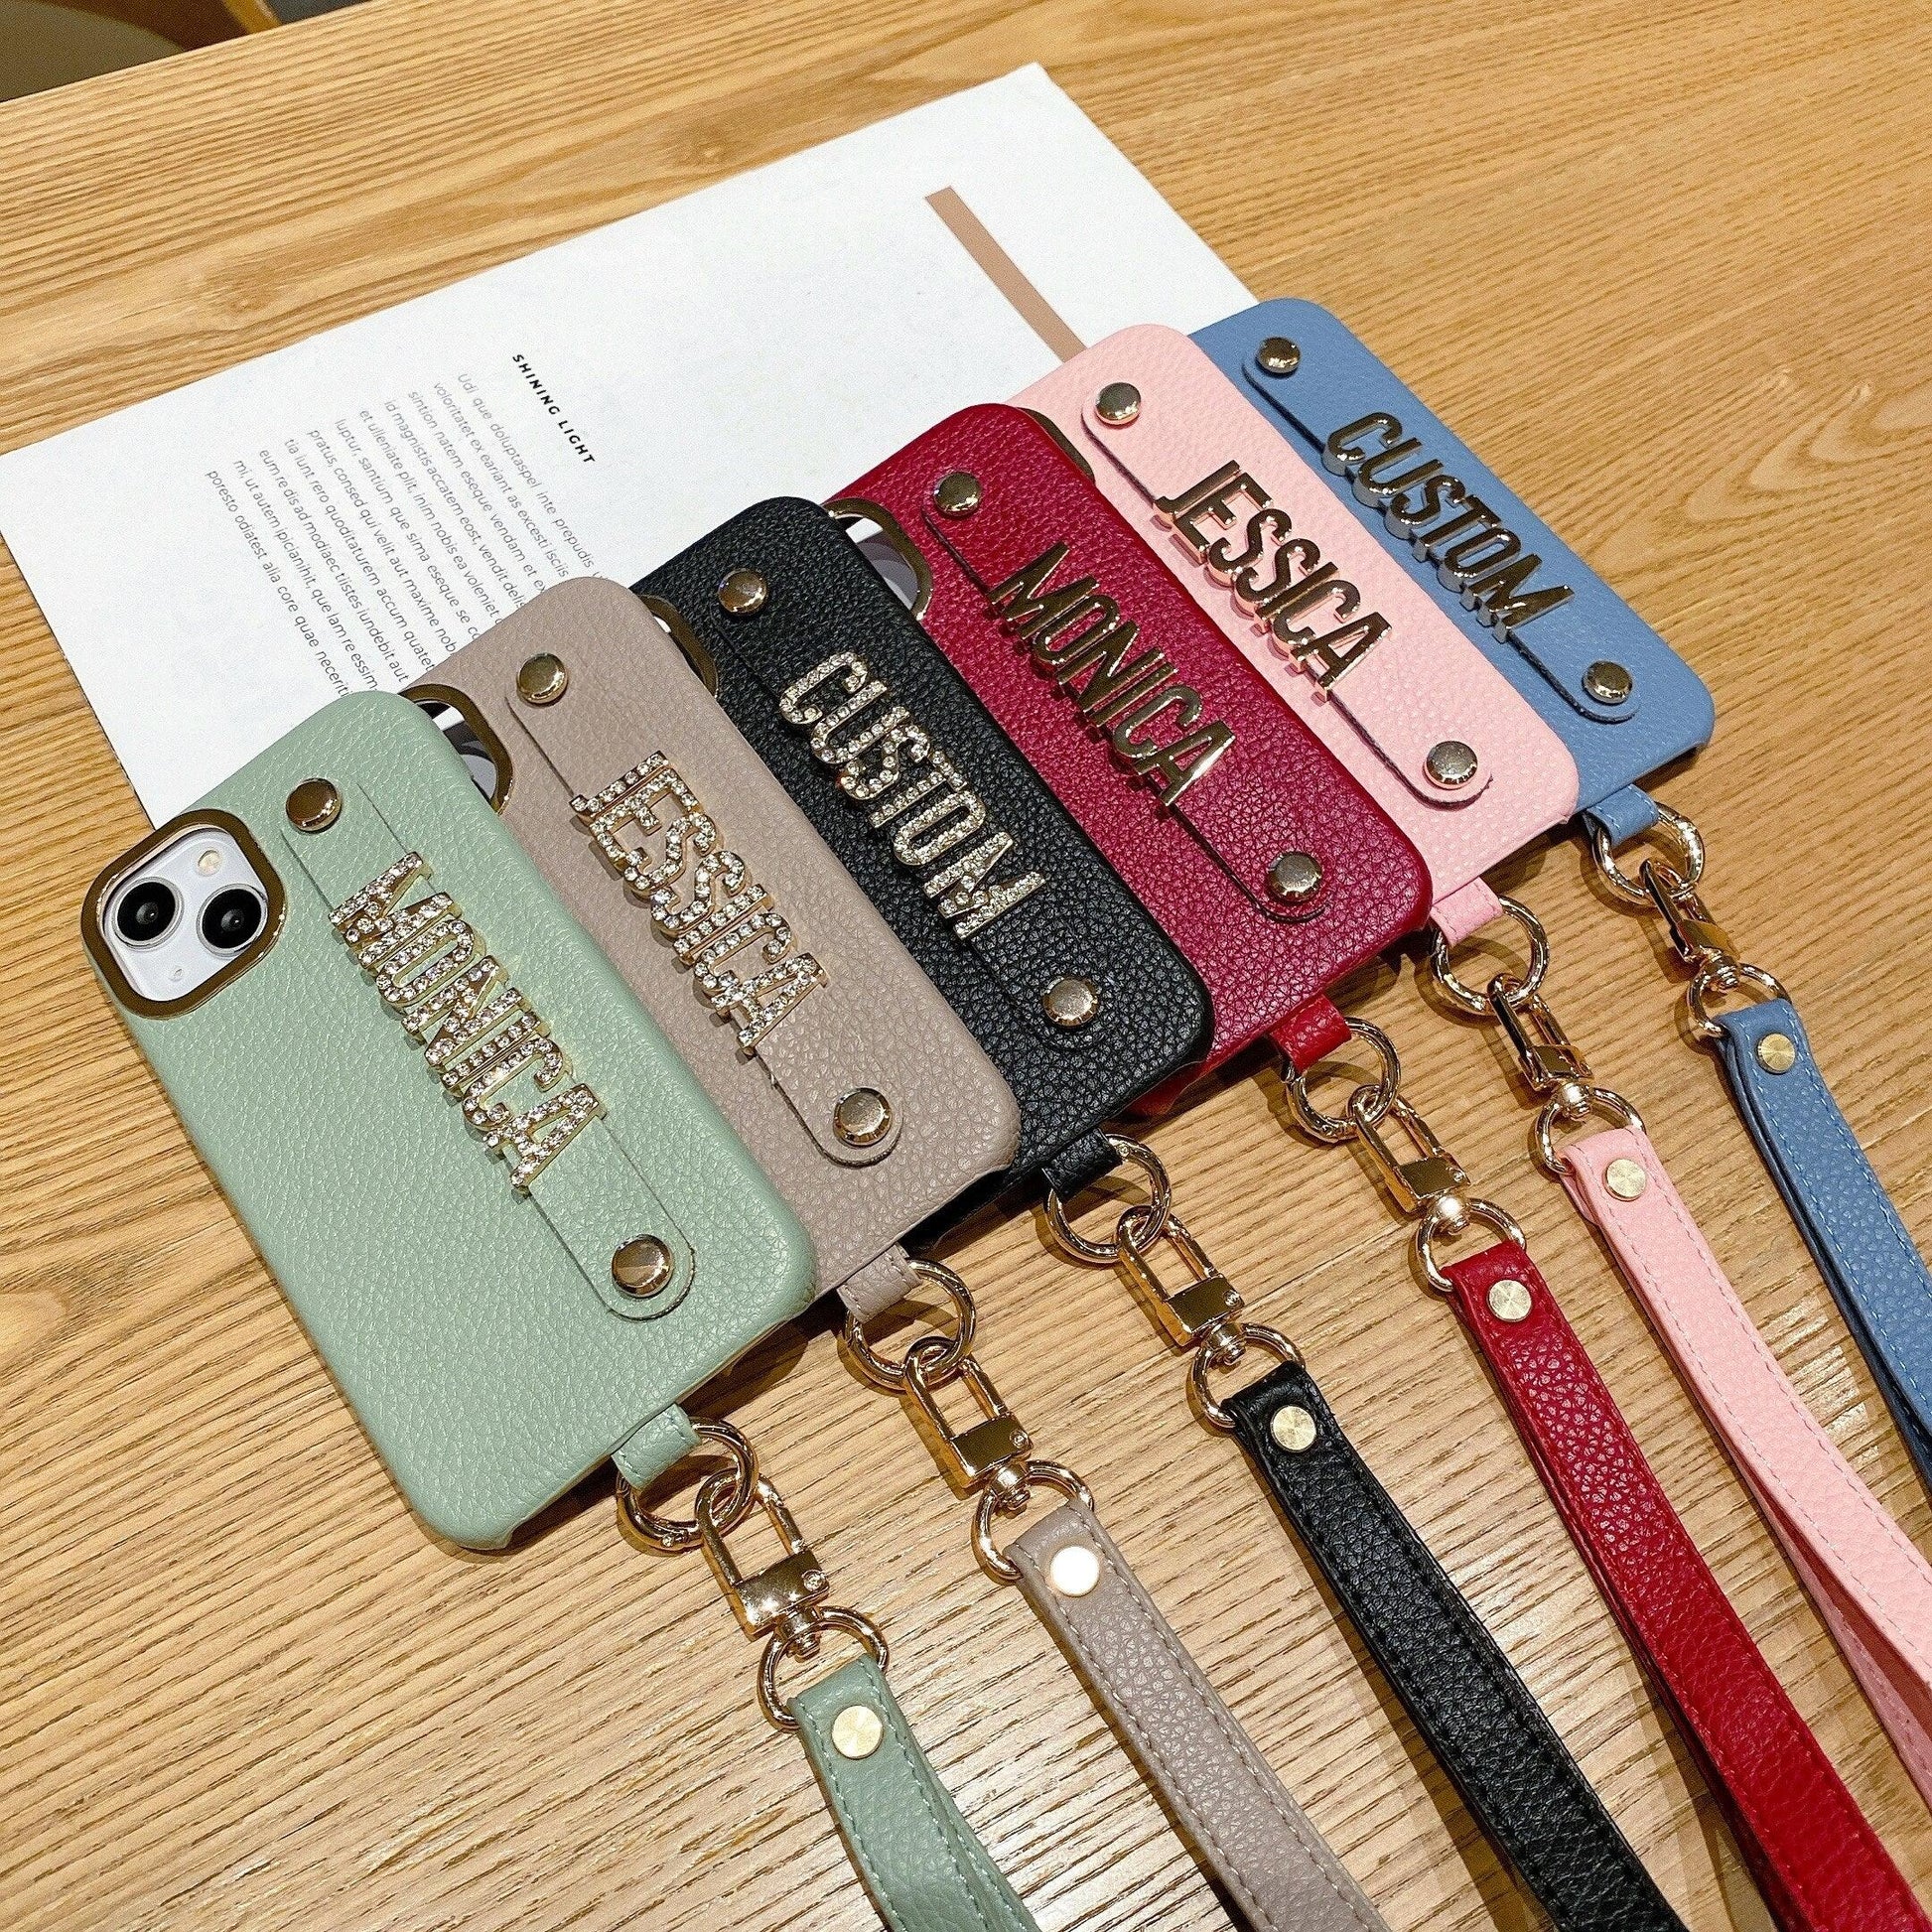 Personalise Name Strap PU Leather Phone Case For iPhone 11 12 13 14 Pro Max Plus Lanyard Diamond Metal Letter Monogram Cover - Thumbedtreats